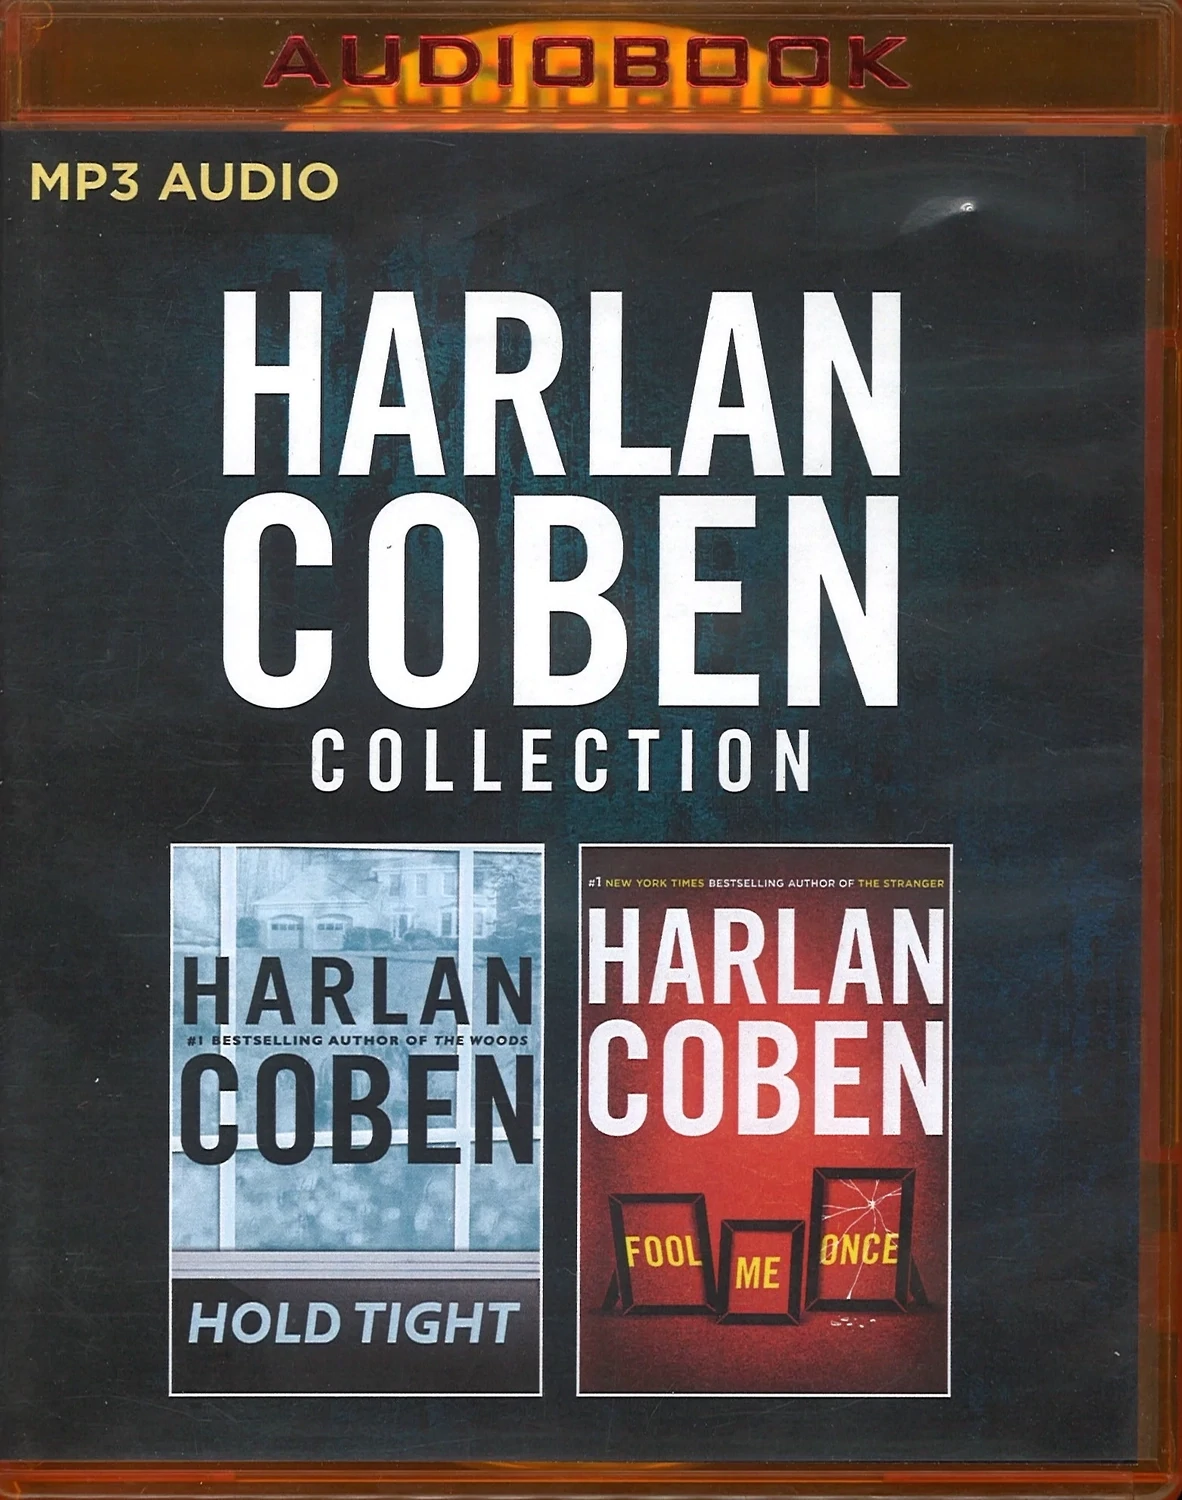 Harlan Coben Collection: Hold Tight / Fool Me Once (Audiobook)